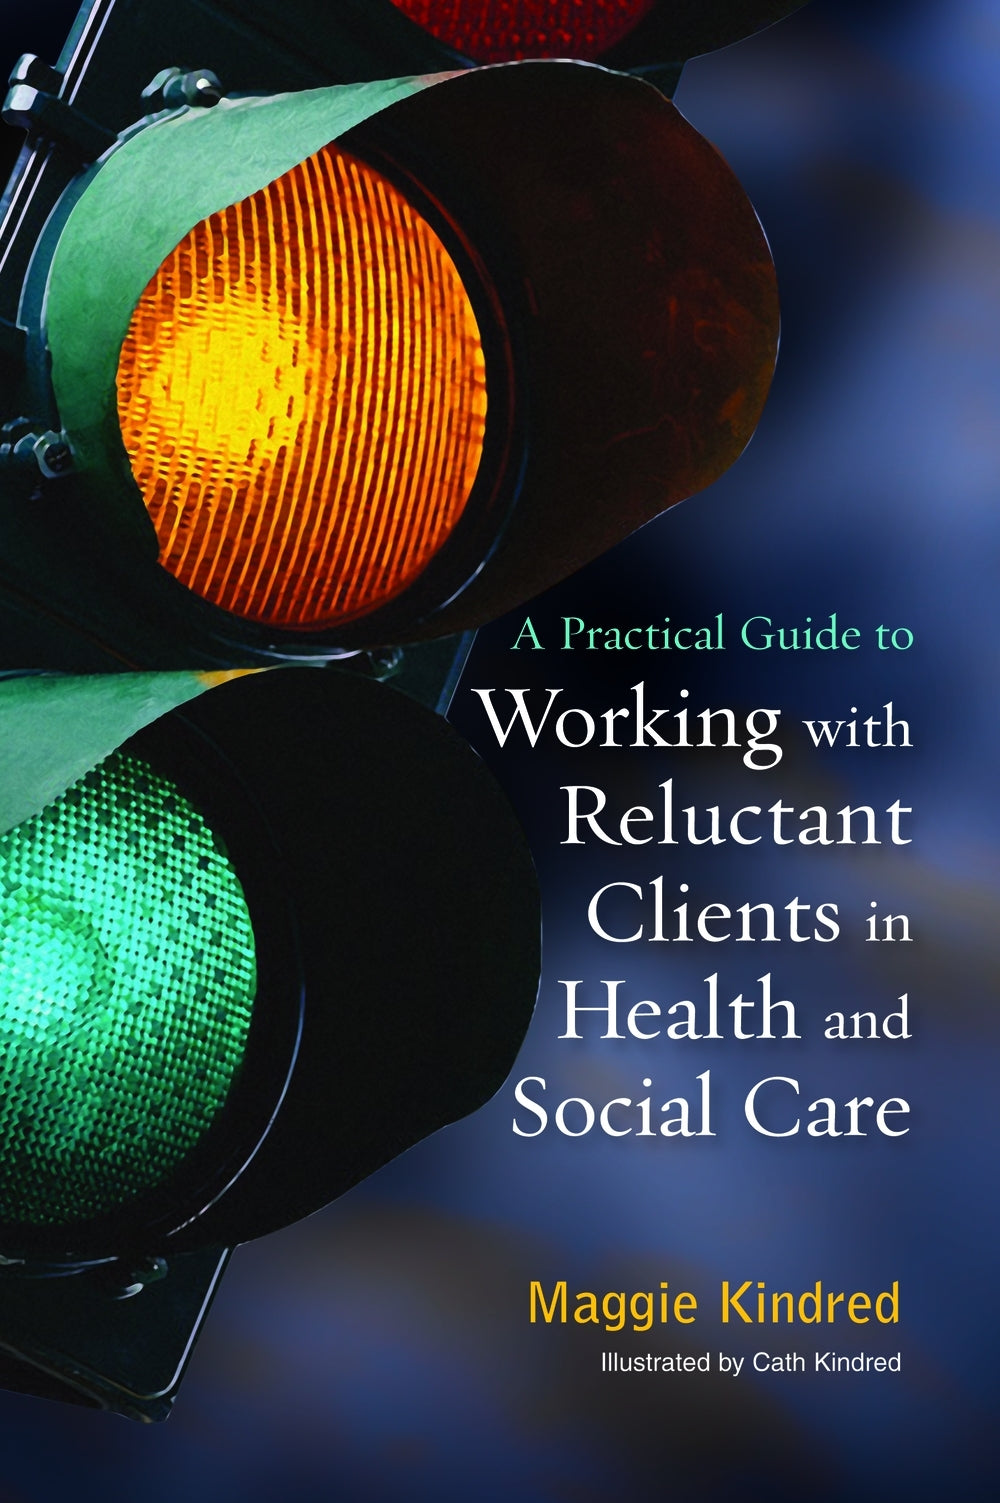 A Practical Guide to Working with Reluctant Clients in Health and Social Care by Maggie Kindred, Cath Kindred